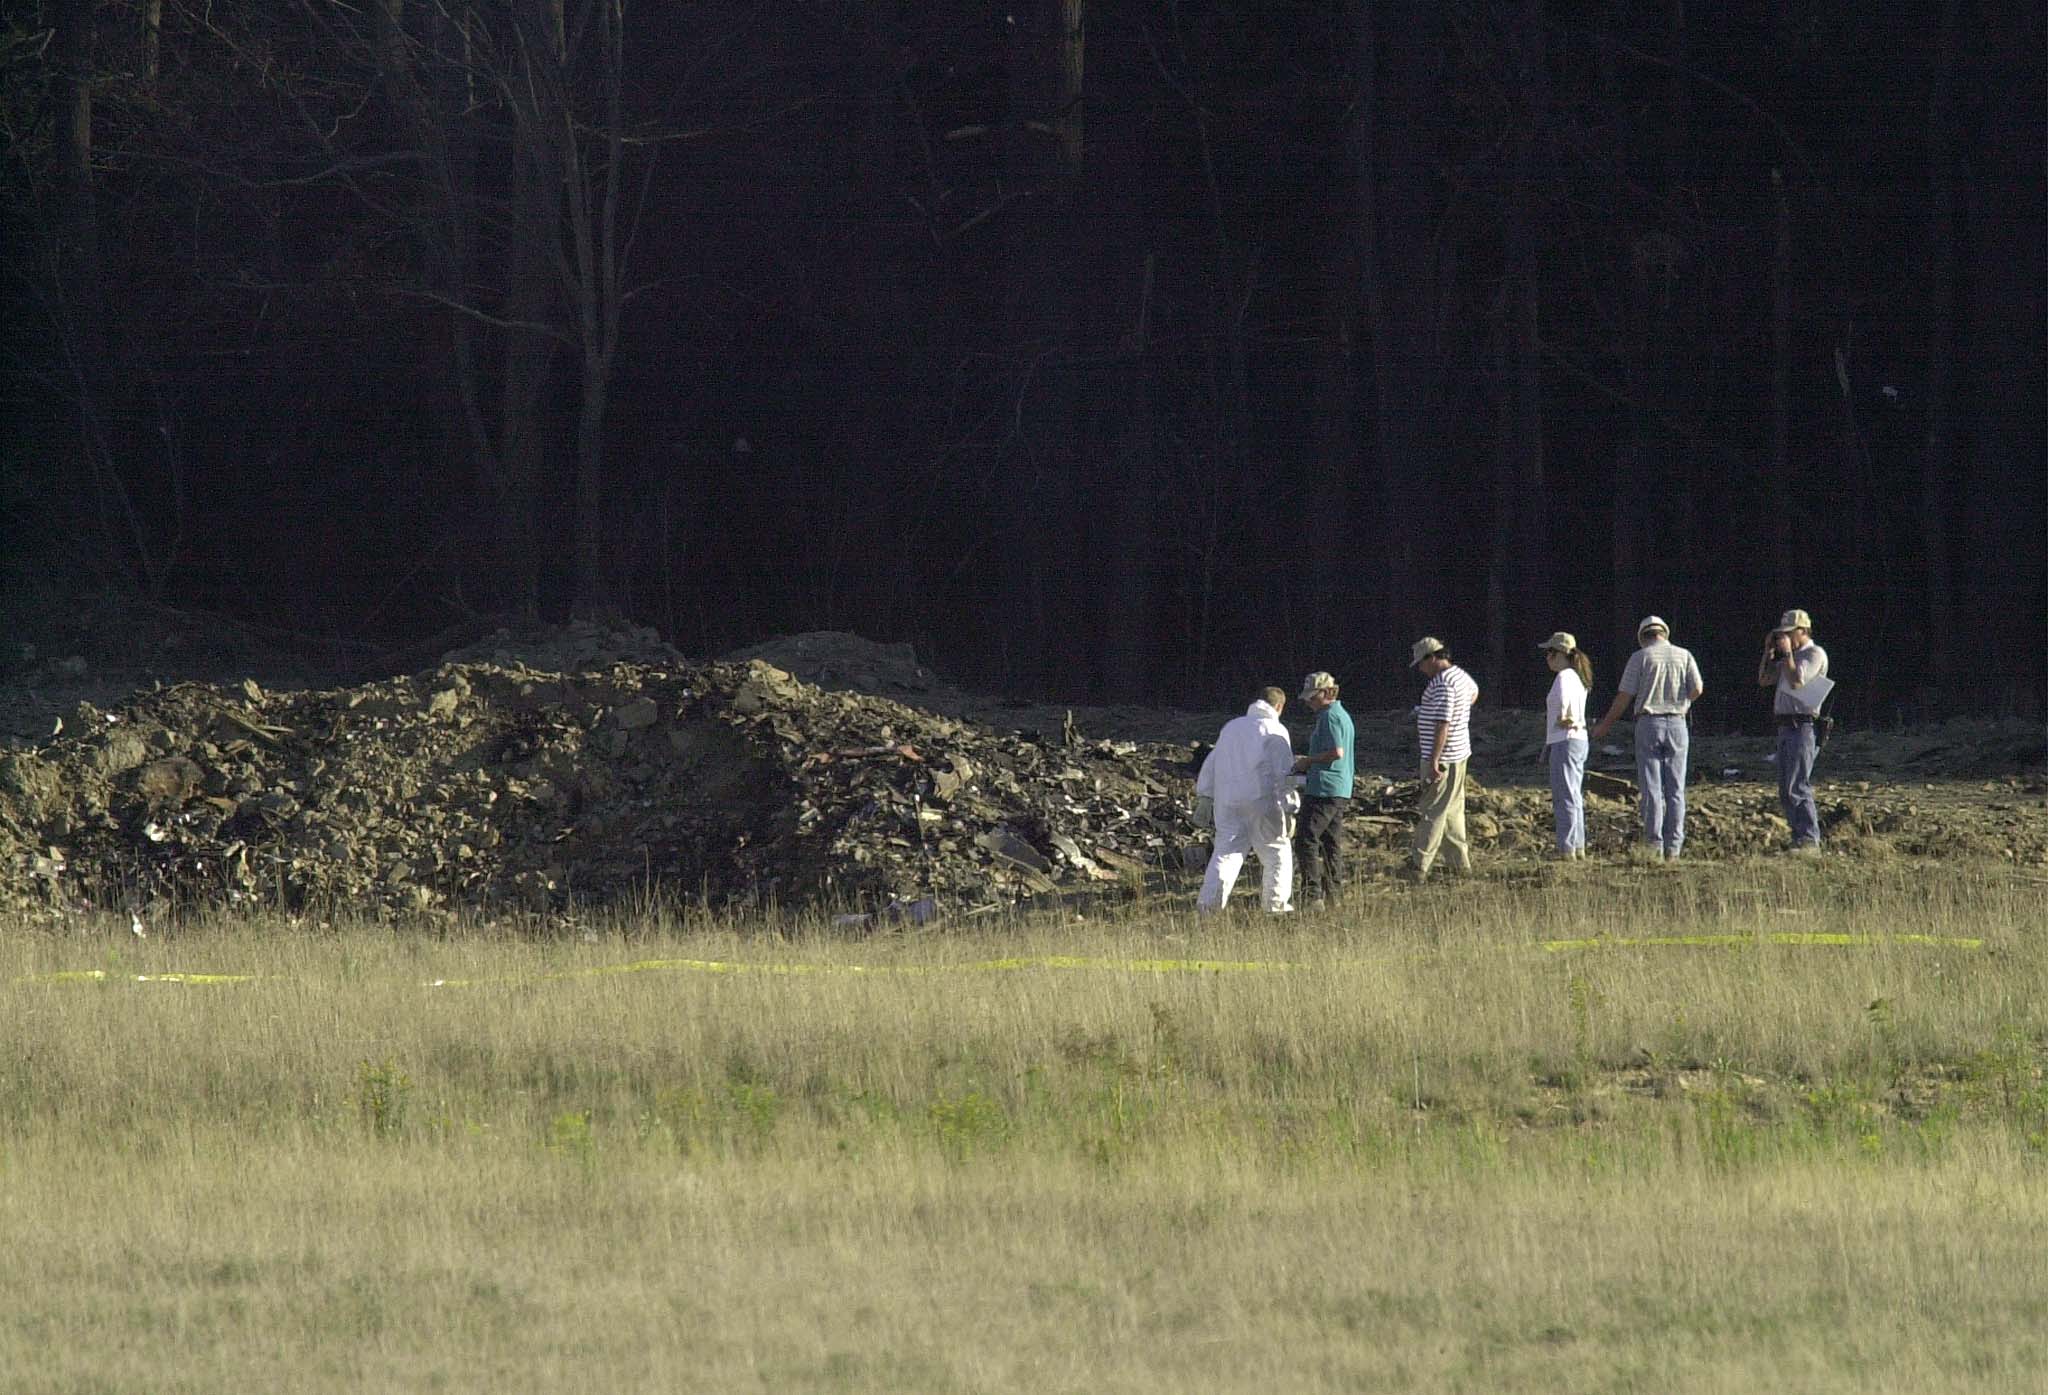 Officials examine the wreckage of United Airlines Flight 93 in Shanksville, Pennsylvania